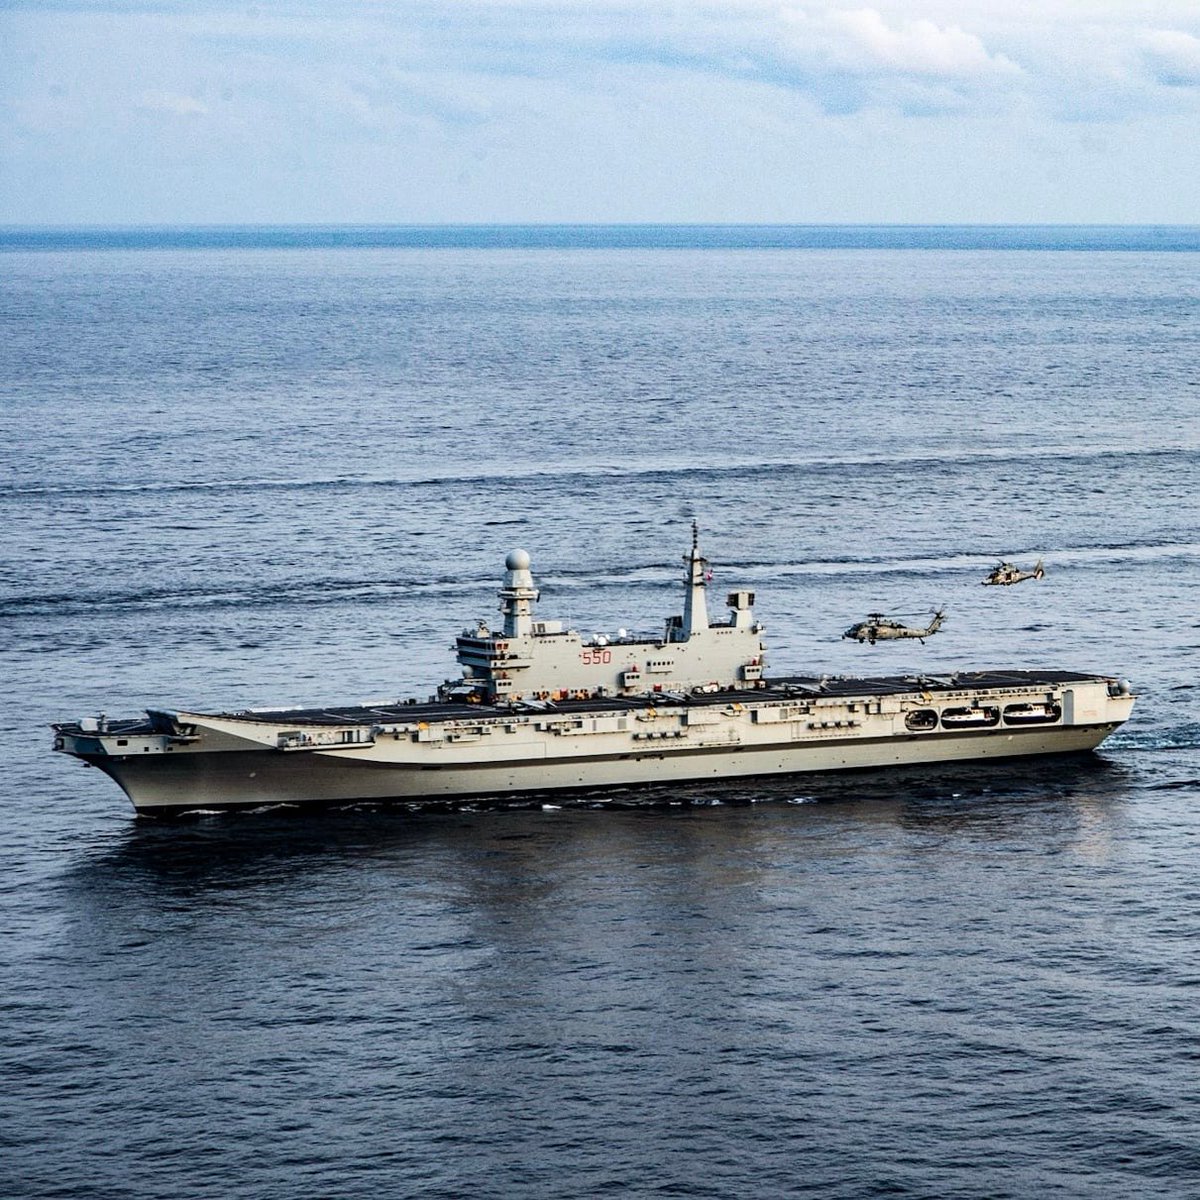 Italian Navy aircraft carrier Cavour C550 with four AVB8+ Harrier II jets on flight deck, during the recent joint operation with MN De Gaulle R91 and USN CVN75.
#WeAreNATO.